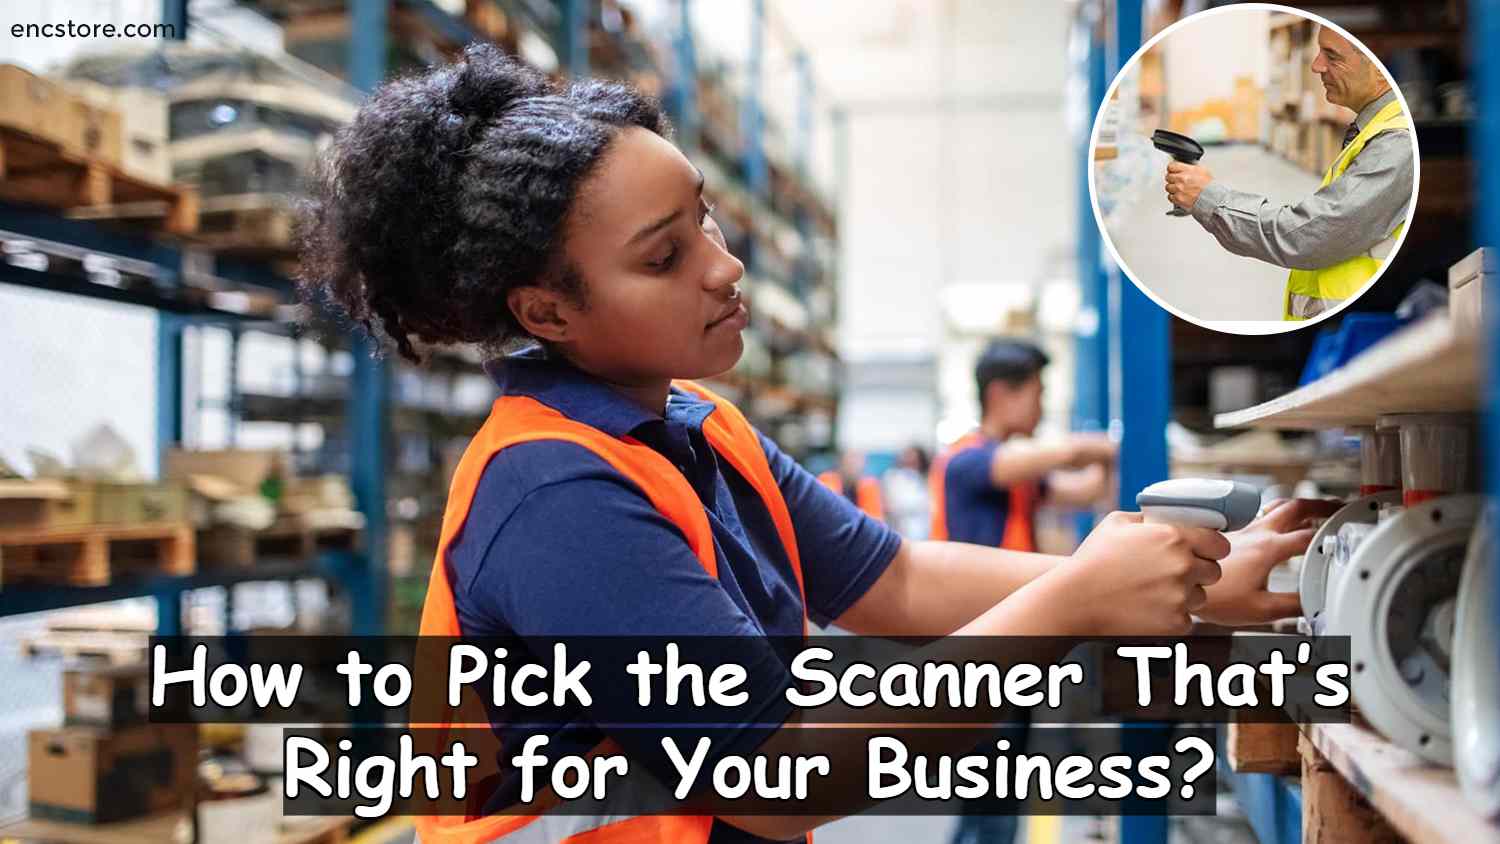 How to Pick the Scanner That’s Right for Your Business?